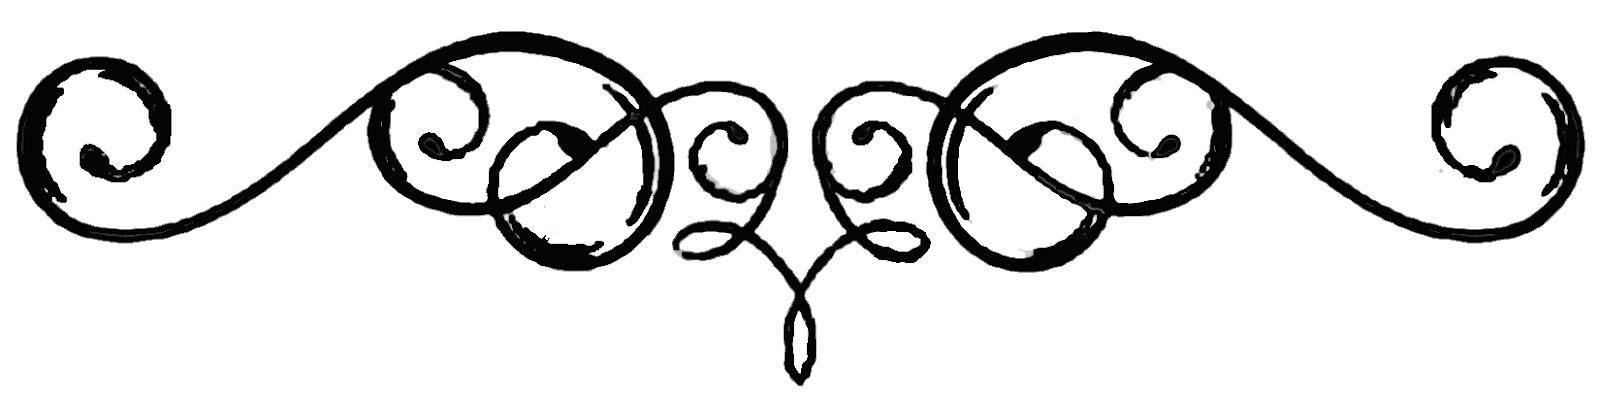 Scrollwork clipart, Scrollwork Transparent FREE for download on ...